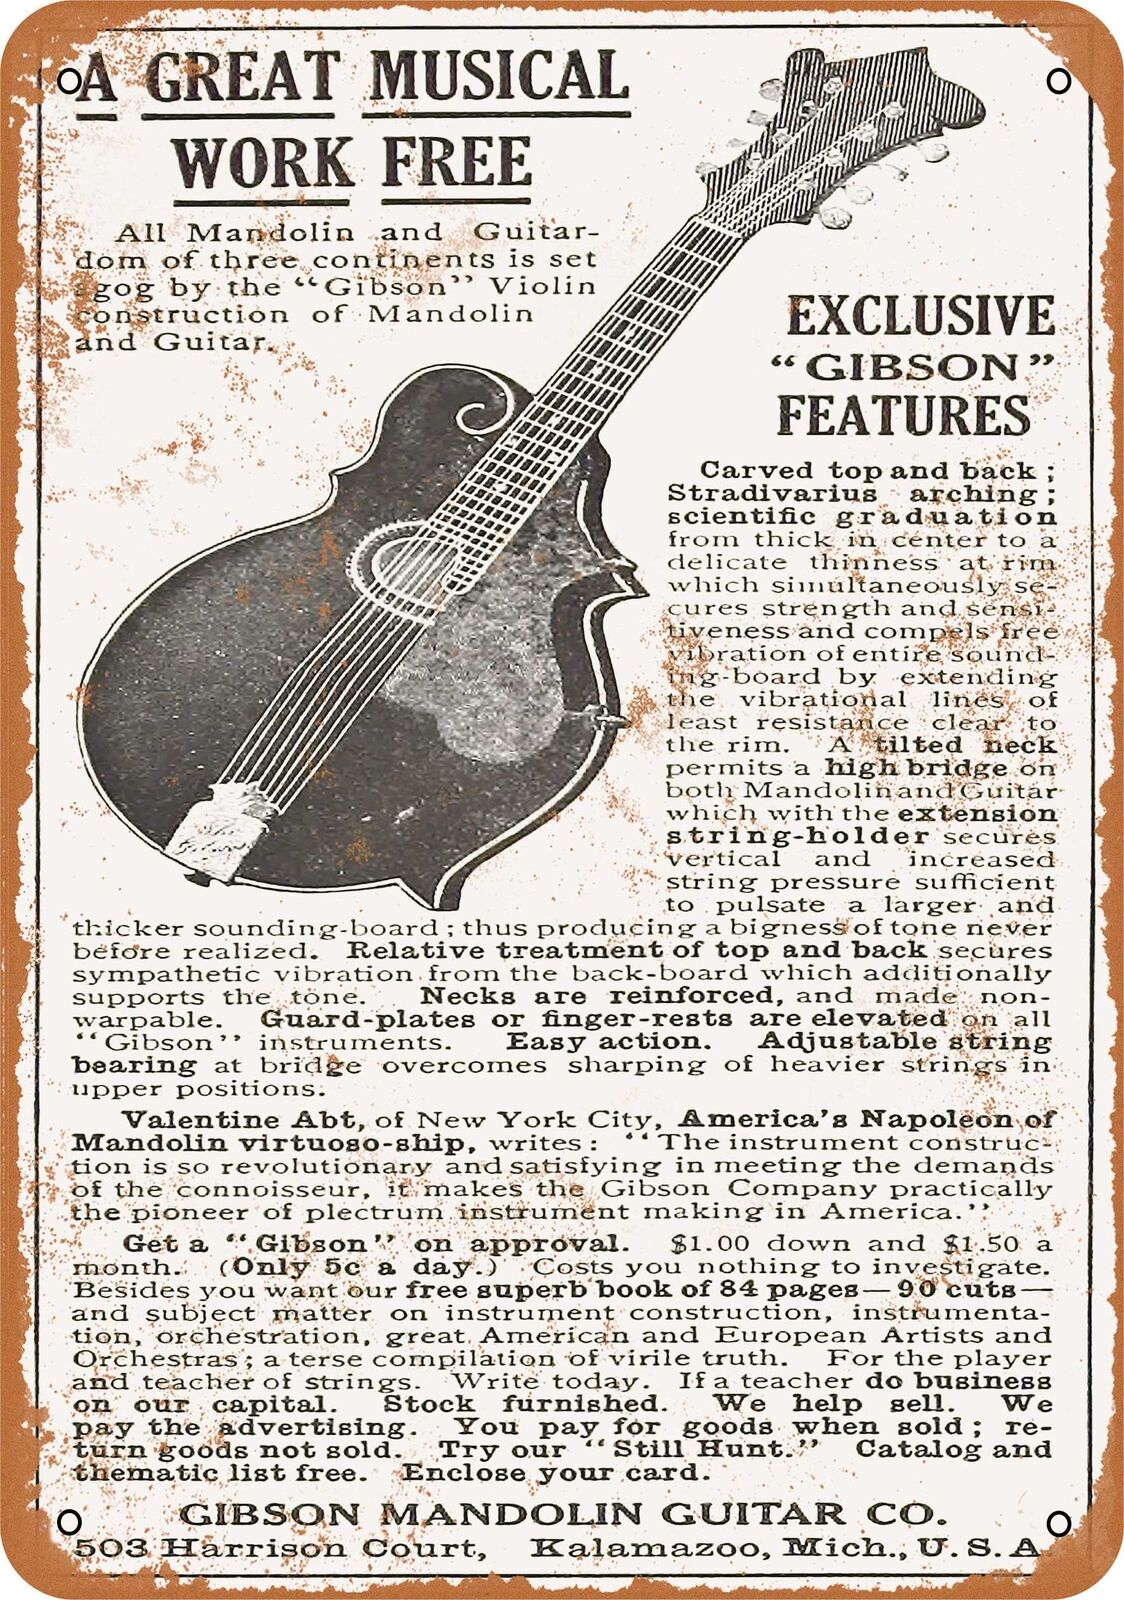 Metal Sign - 1911 Gibson Guitars and Mandolins - Vintage Look Reproduction